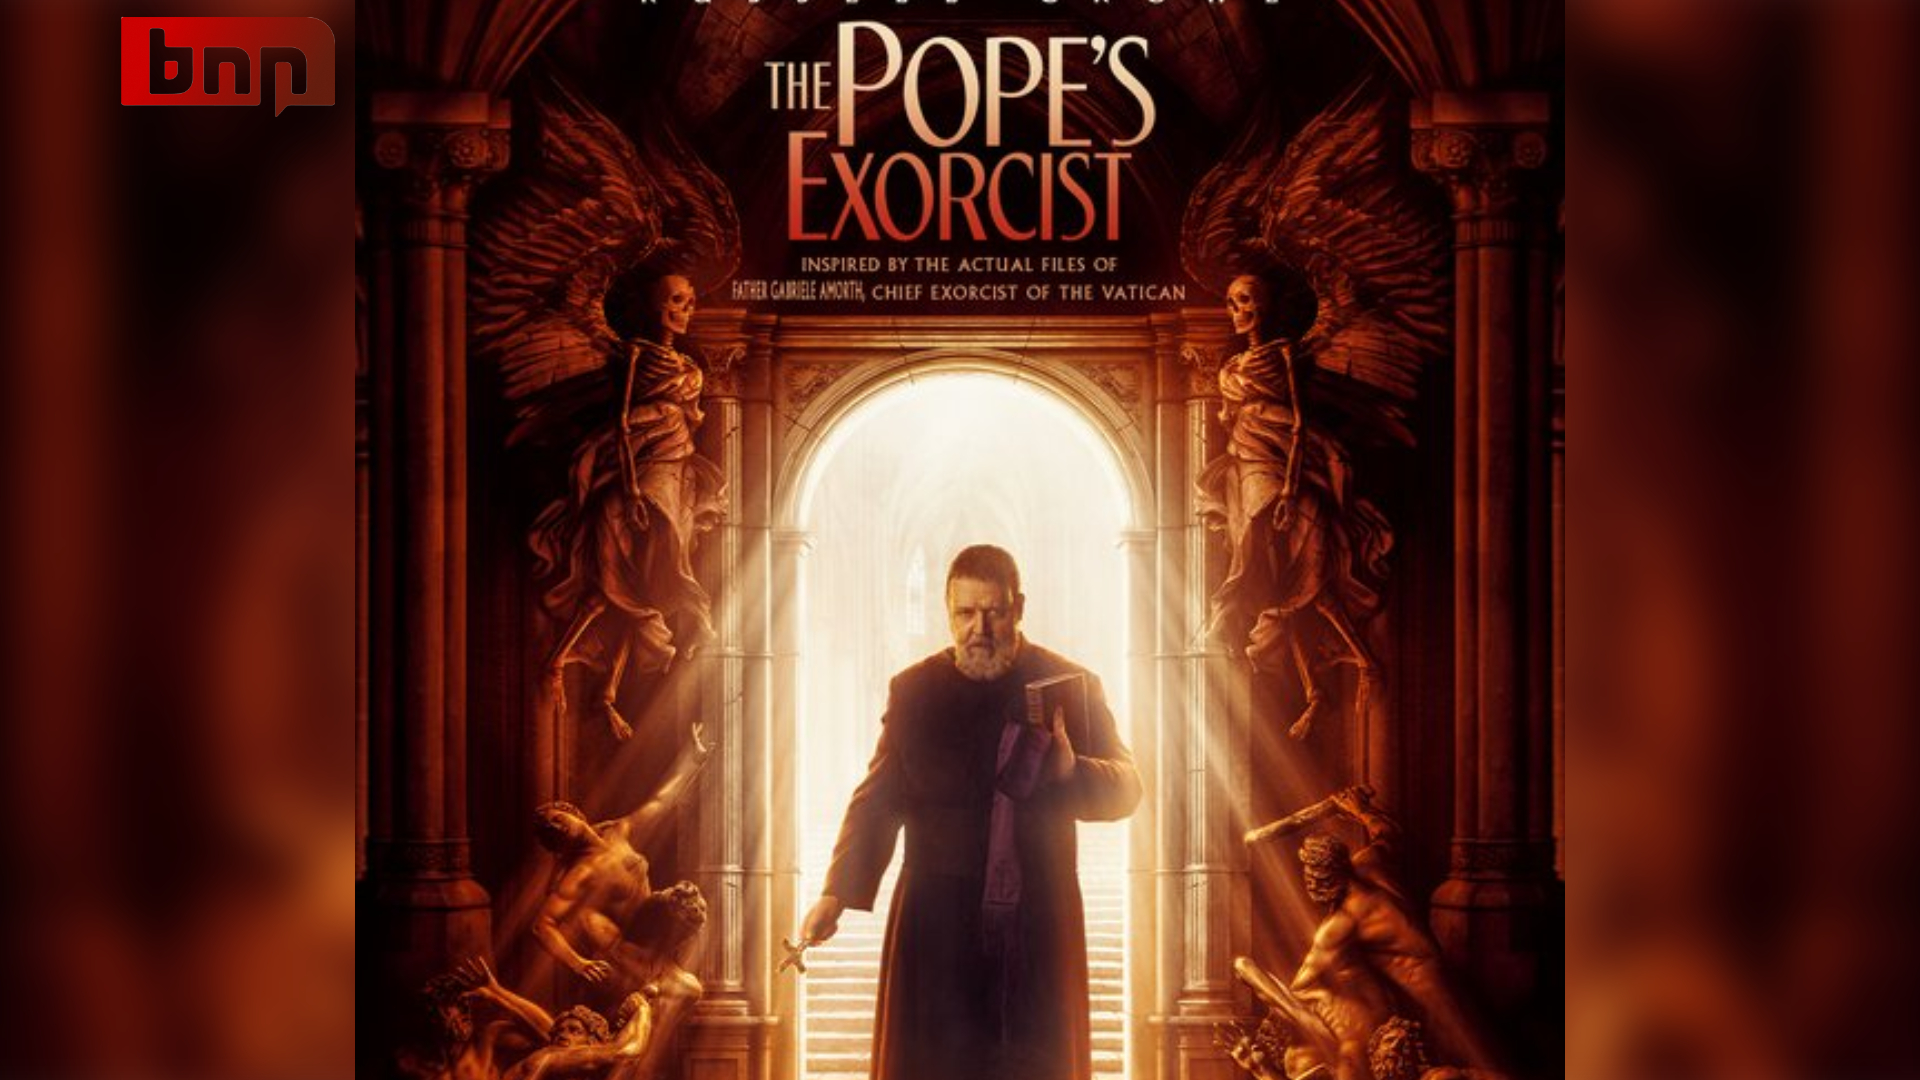 The Pope's Exorcist trailer is out Russell Crowe Battles Demons!